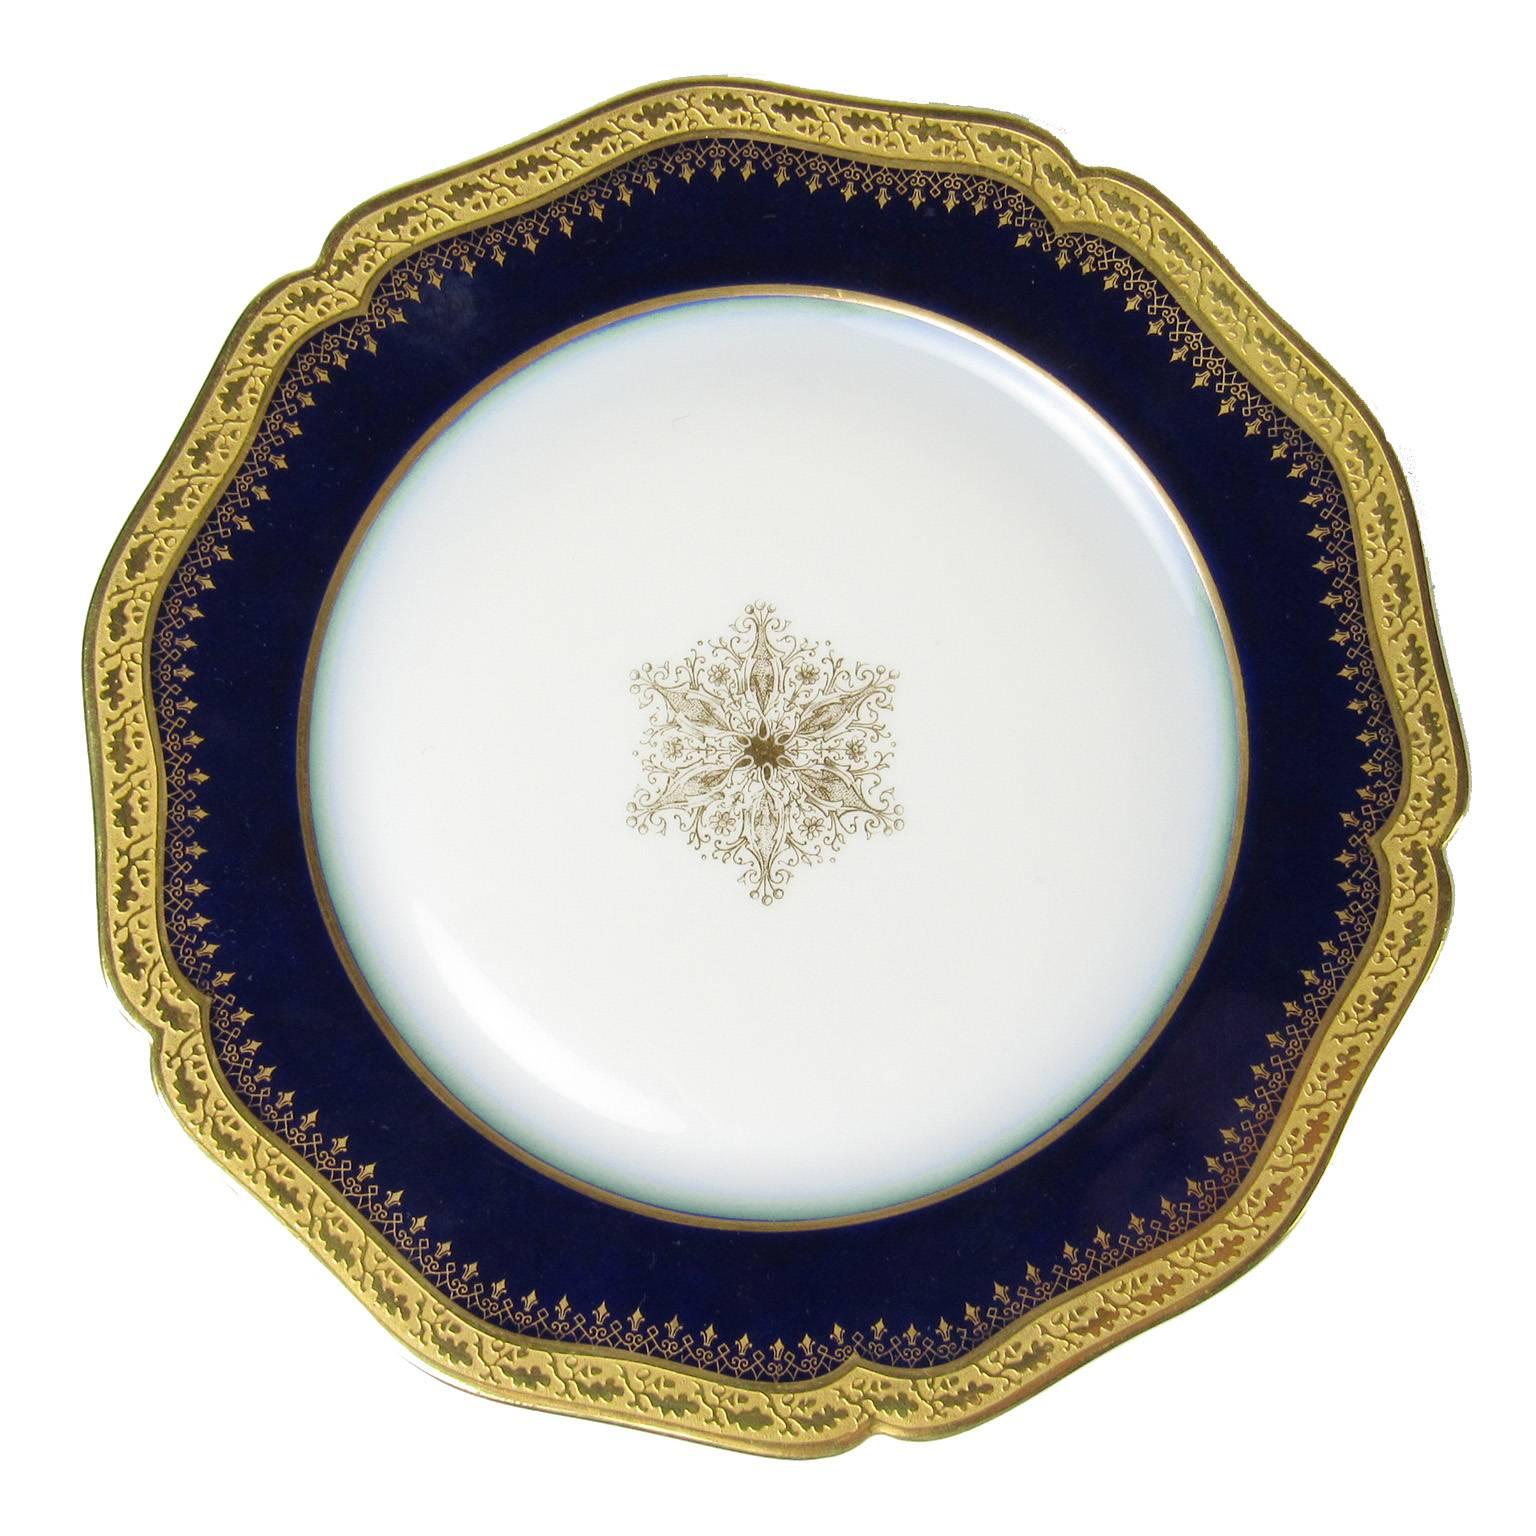 Set of eight William Guerin & Co. Limoges porcelain luncheon plates with a 24-carat gold snowflake adorning the centre, cobalt blue border and gold rims. Marked 